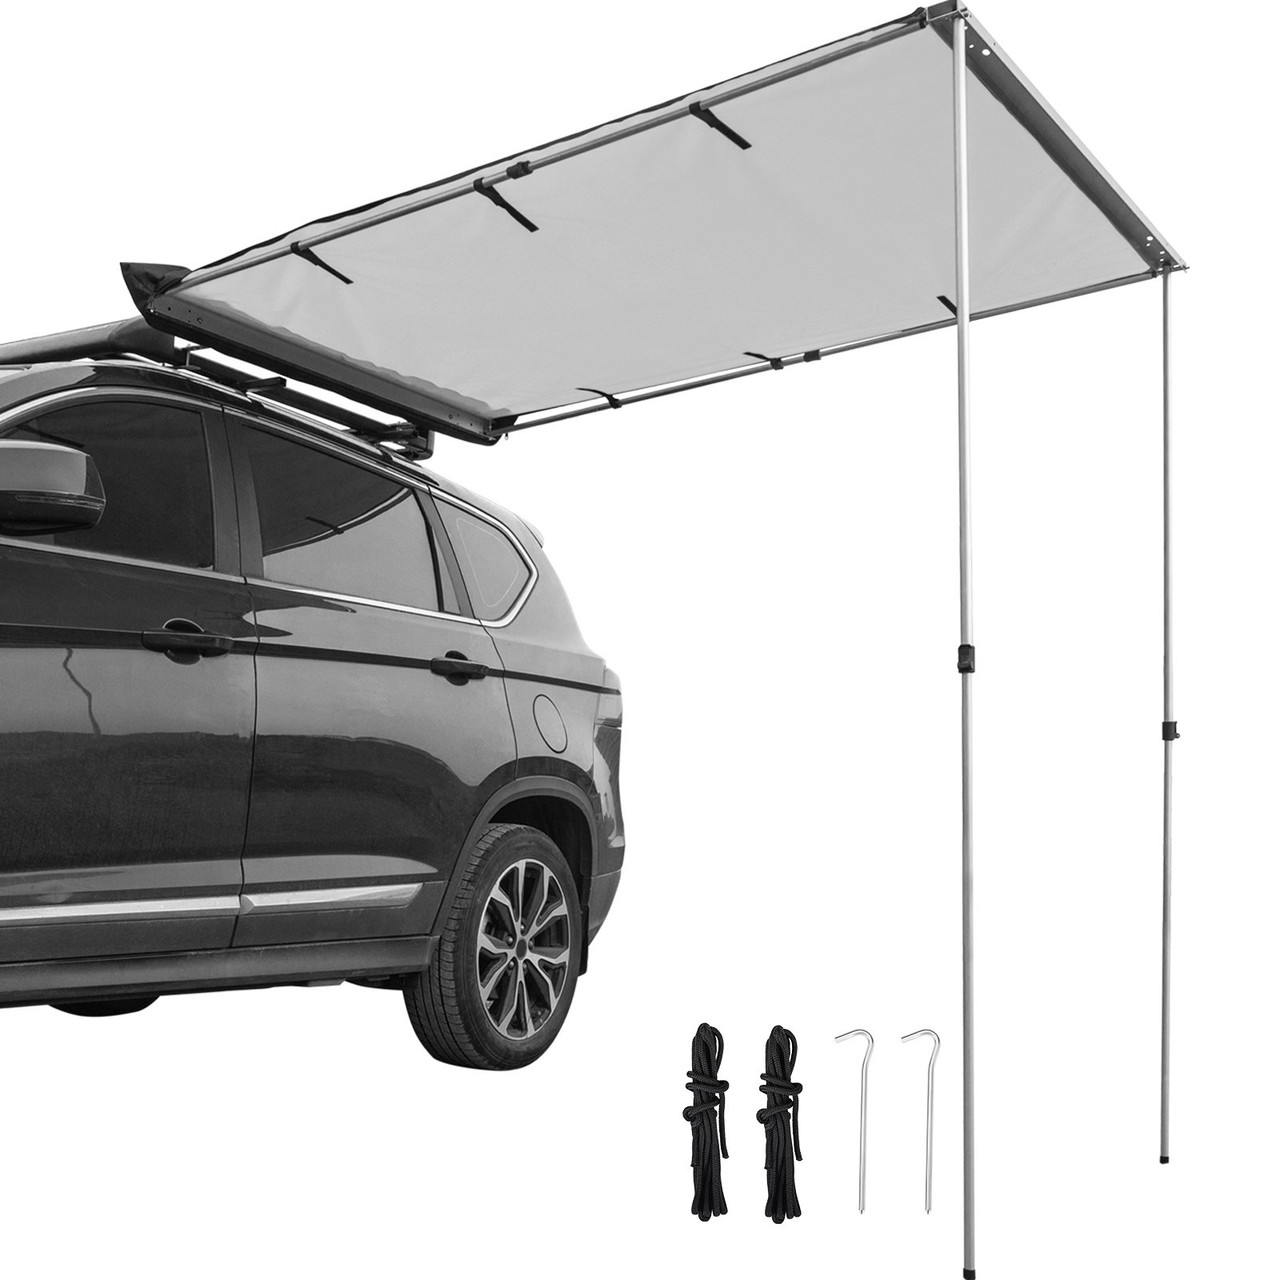 Car Side Awning, 7.6'x8.2', Pull-Out Retractable Vehicle Awning Waterproof UV50+, Telescoping Poles Trailer Sunshade Rooftop Tent w/ Carry Bag for Jeep/SUV/Truck/Van Outdoor Camping Travel, Grey